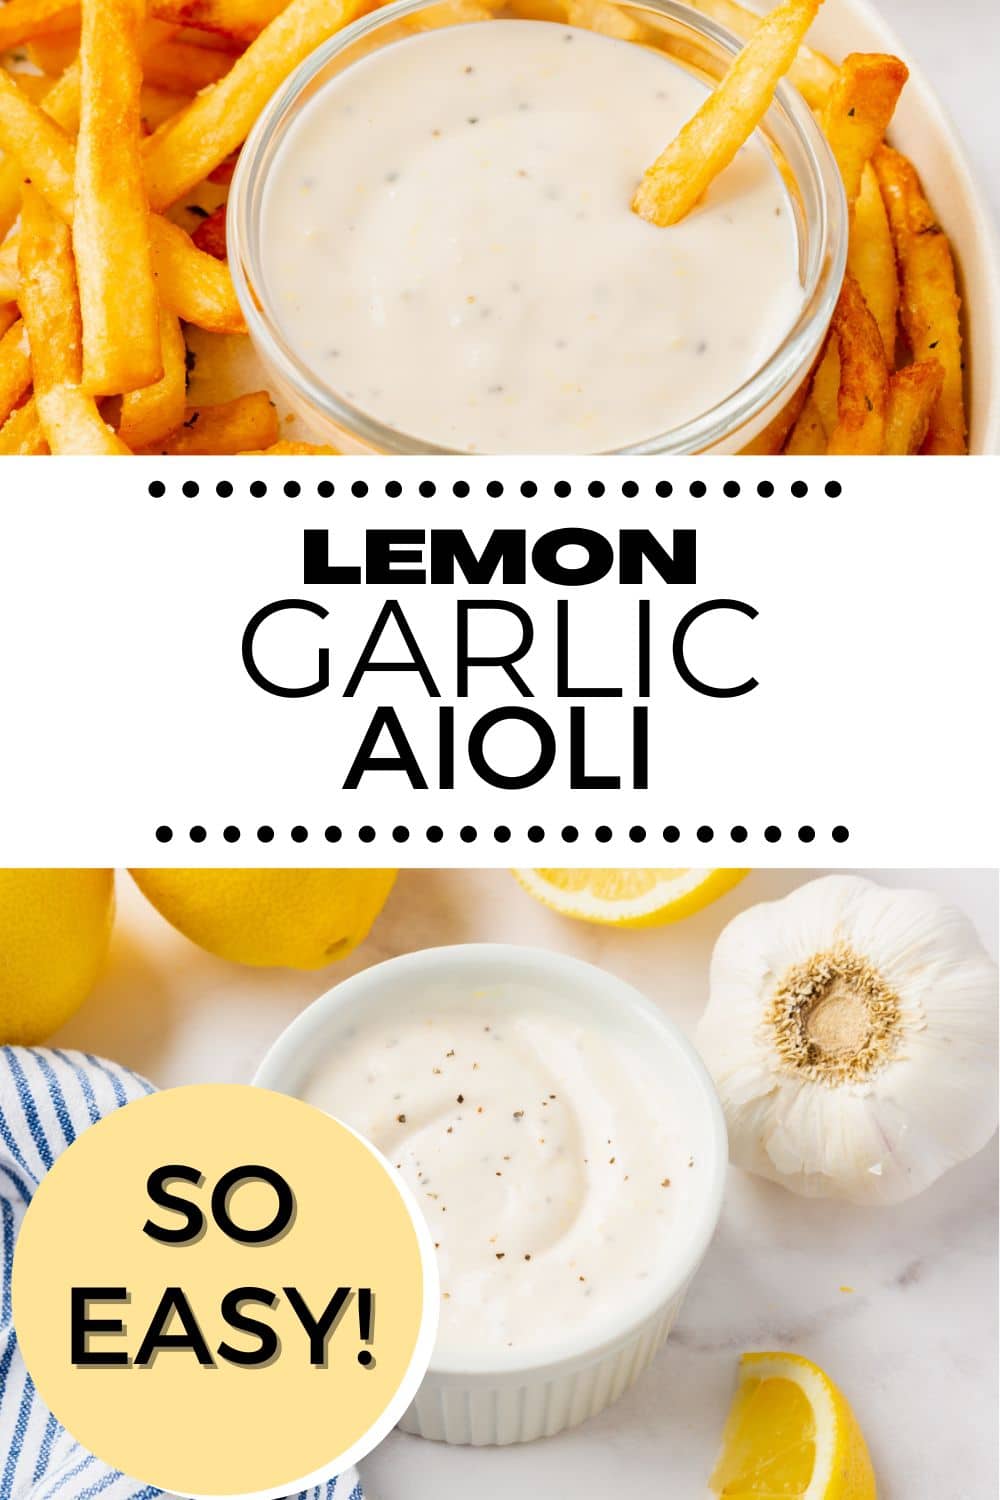 Creamy, savory, bright, and tangy, this homemade Lemon Garlic Aioli checks all the boxes! It's easy to mix up this flavorful sauce for all of your dipping needs.